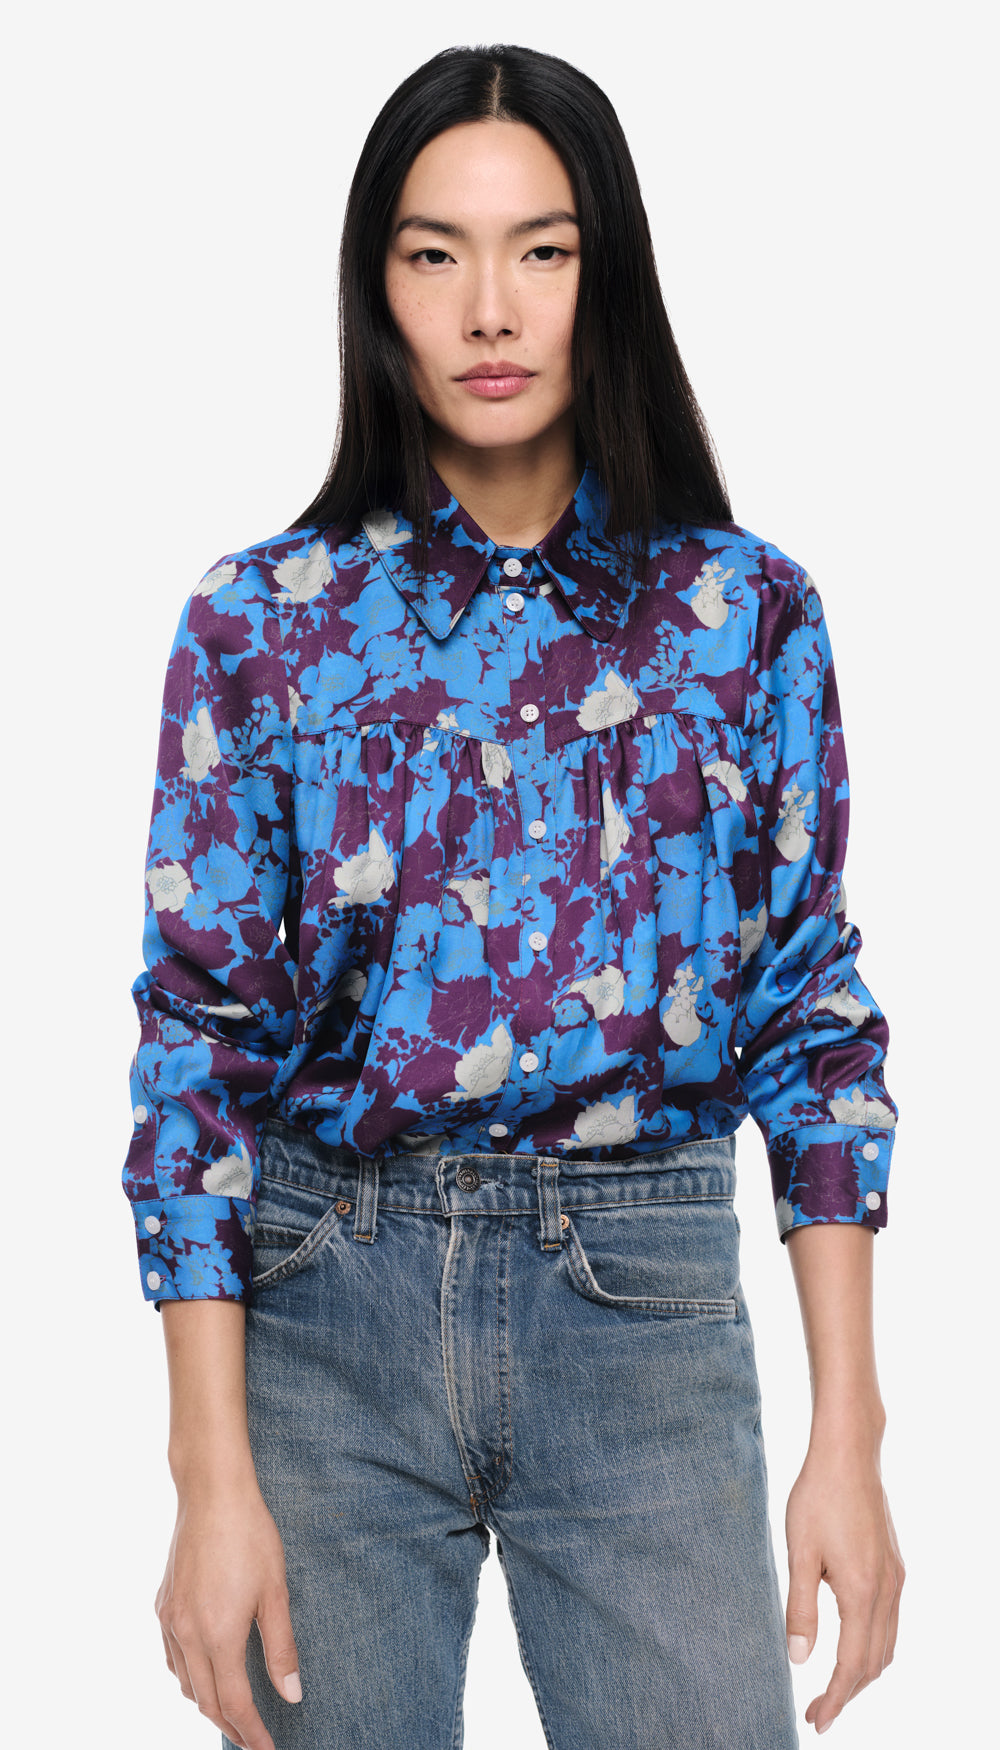 A woman in a blue and purple floral blouse.